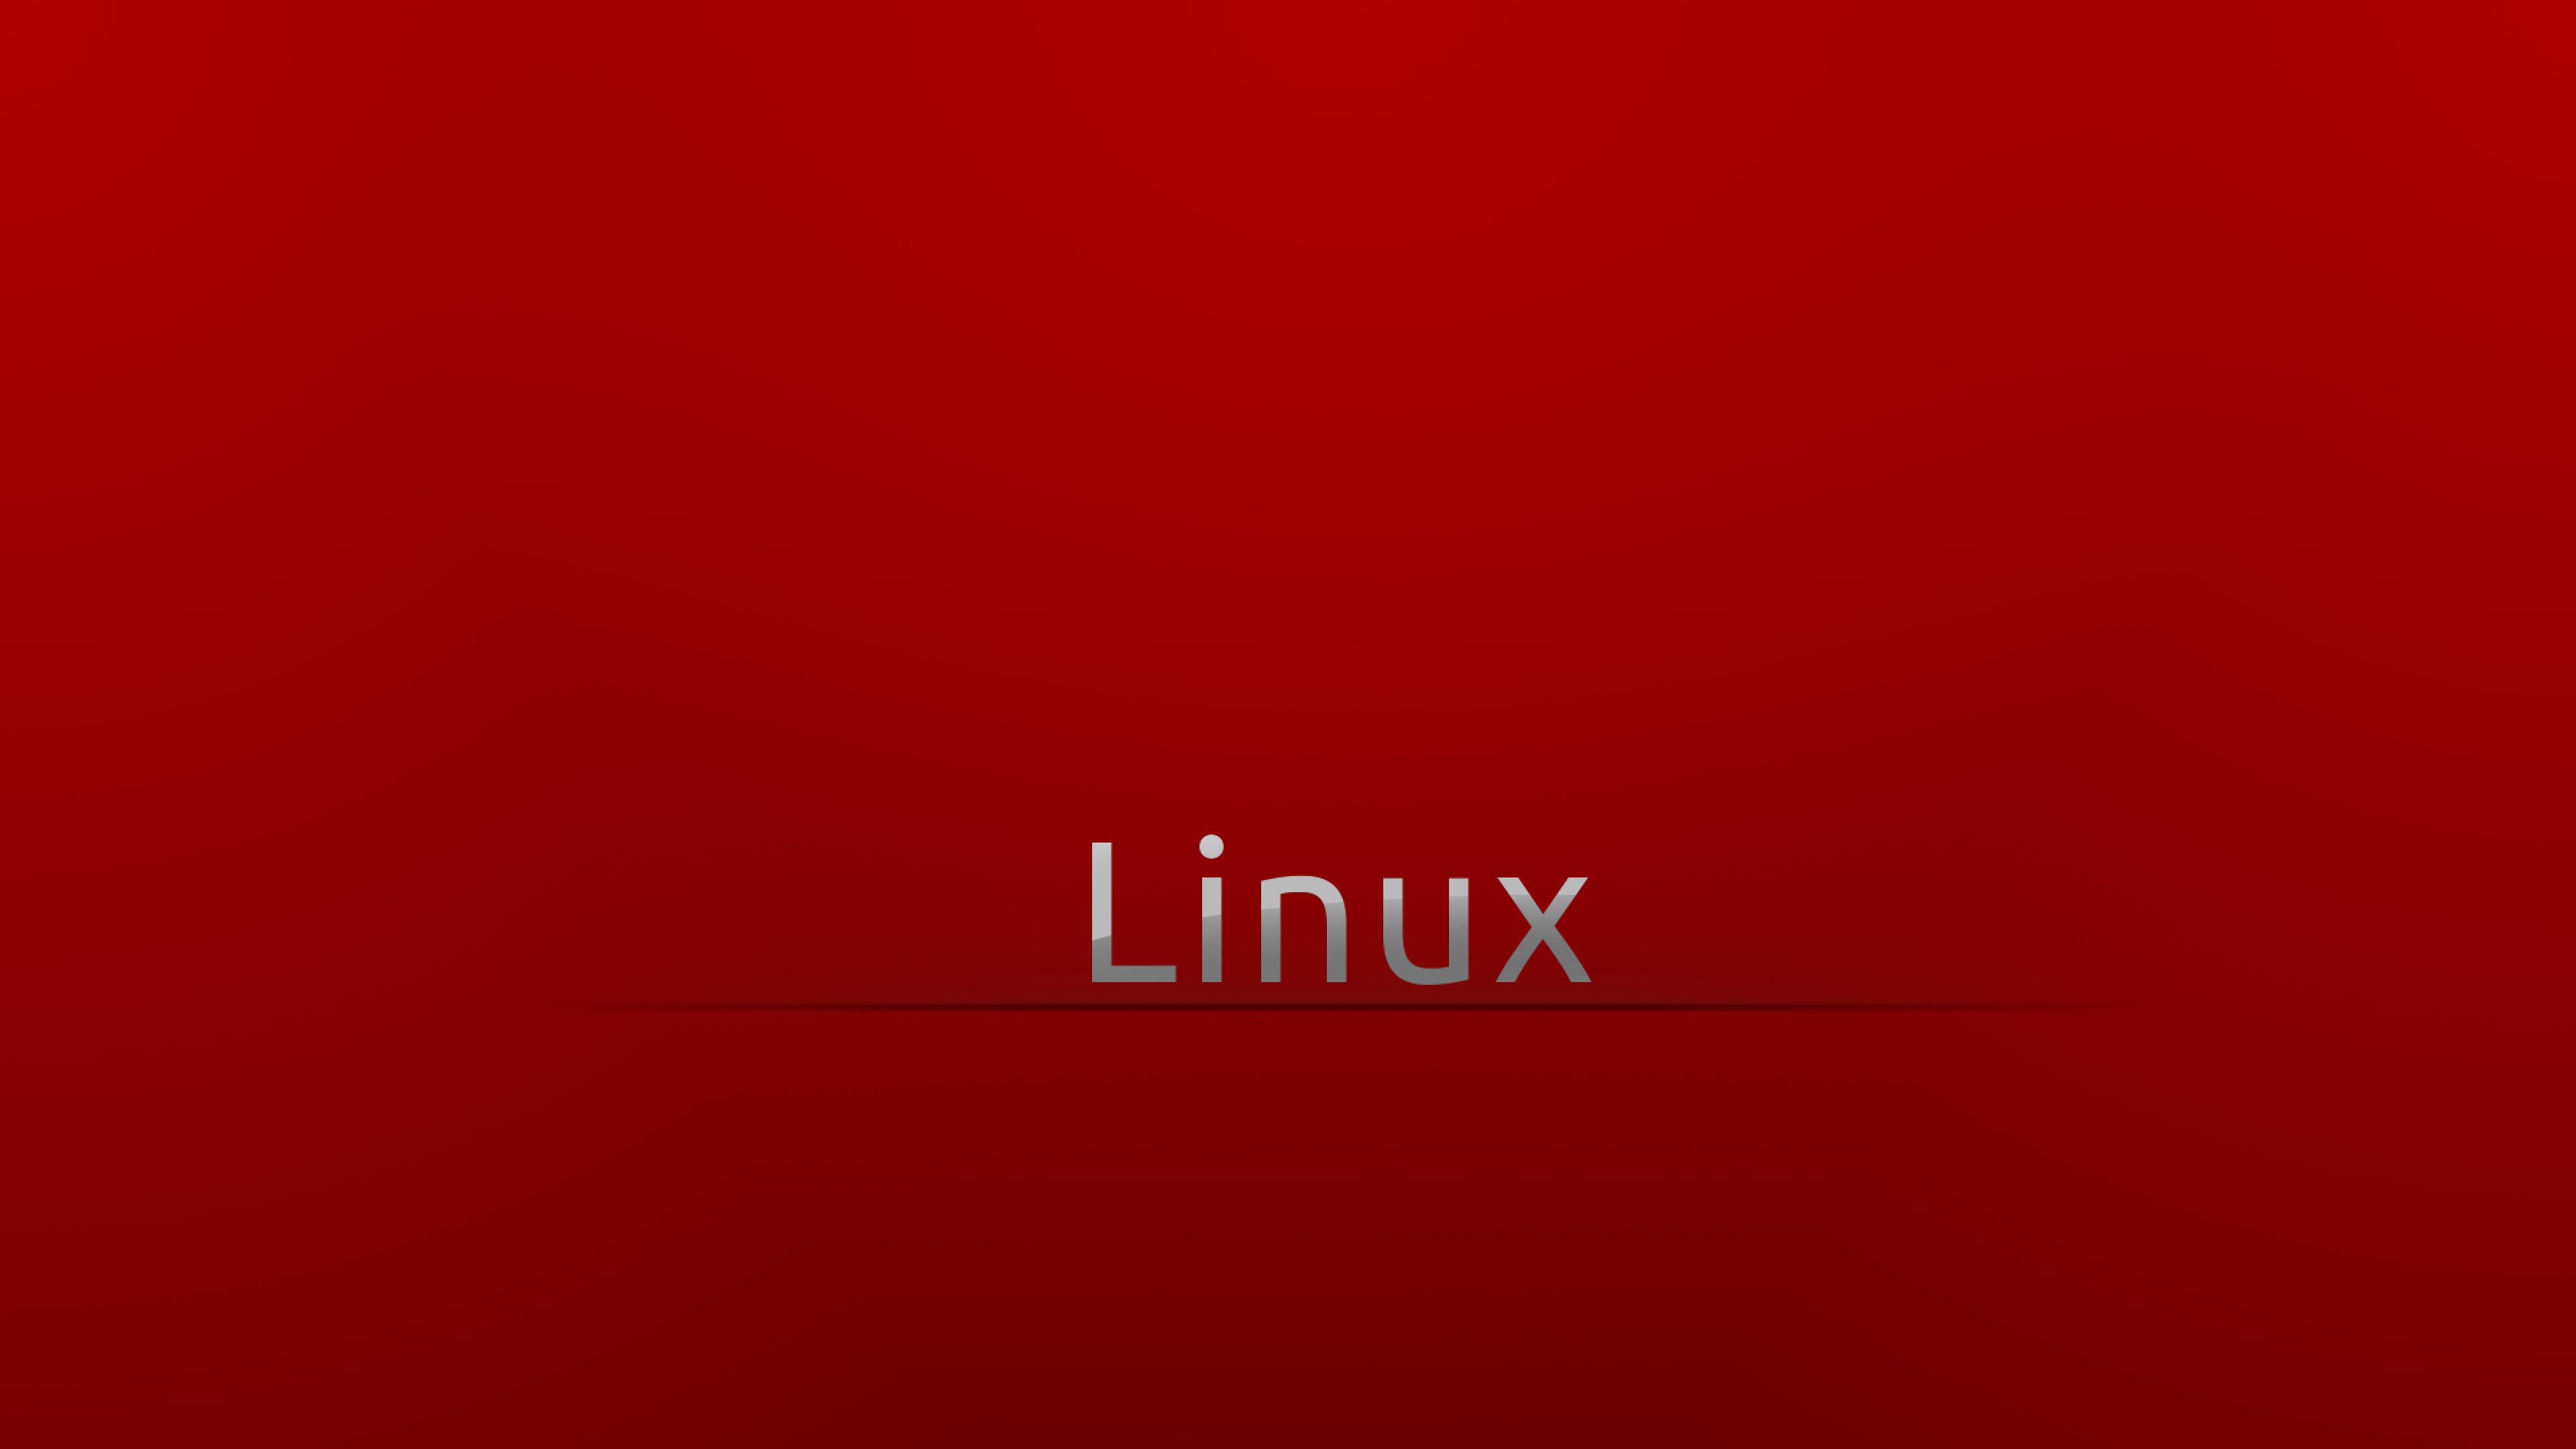 Linux Minimalistic Typography Best Widescreen Background